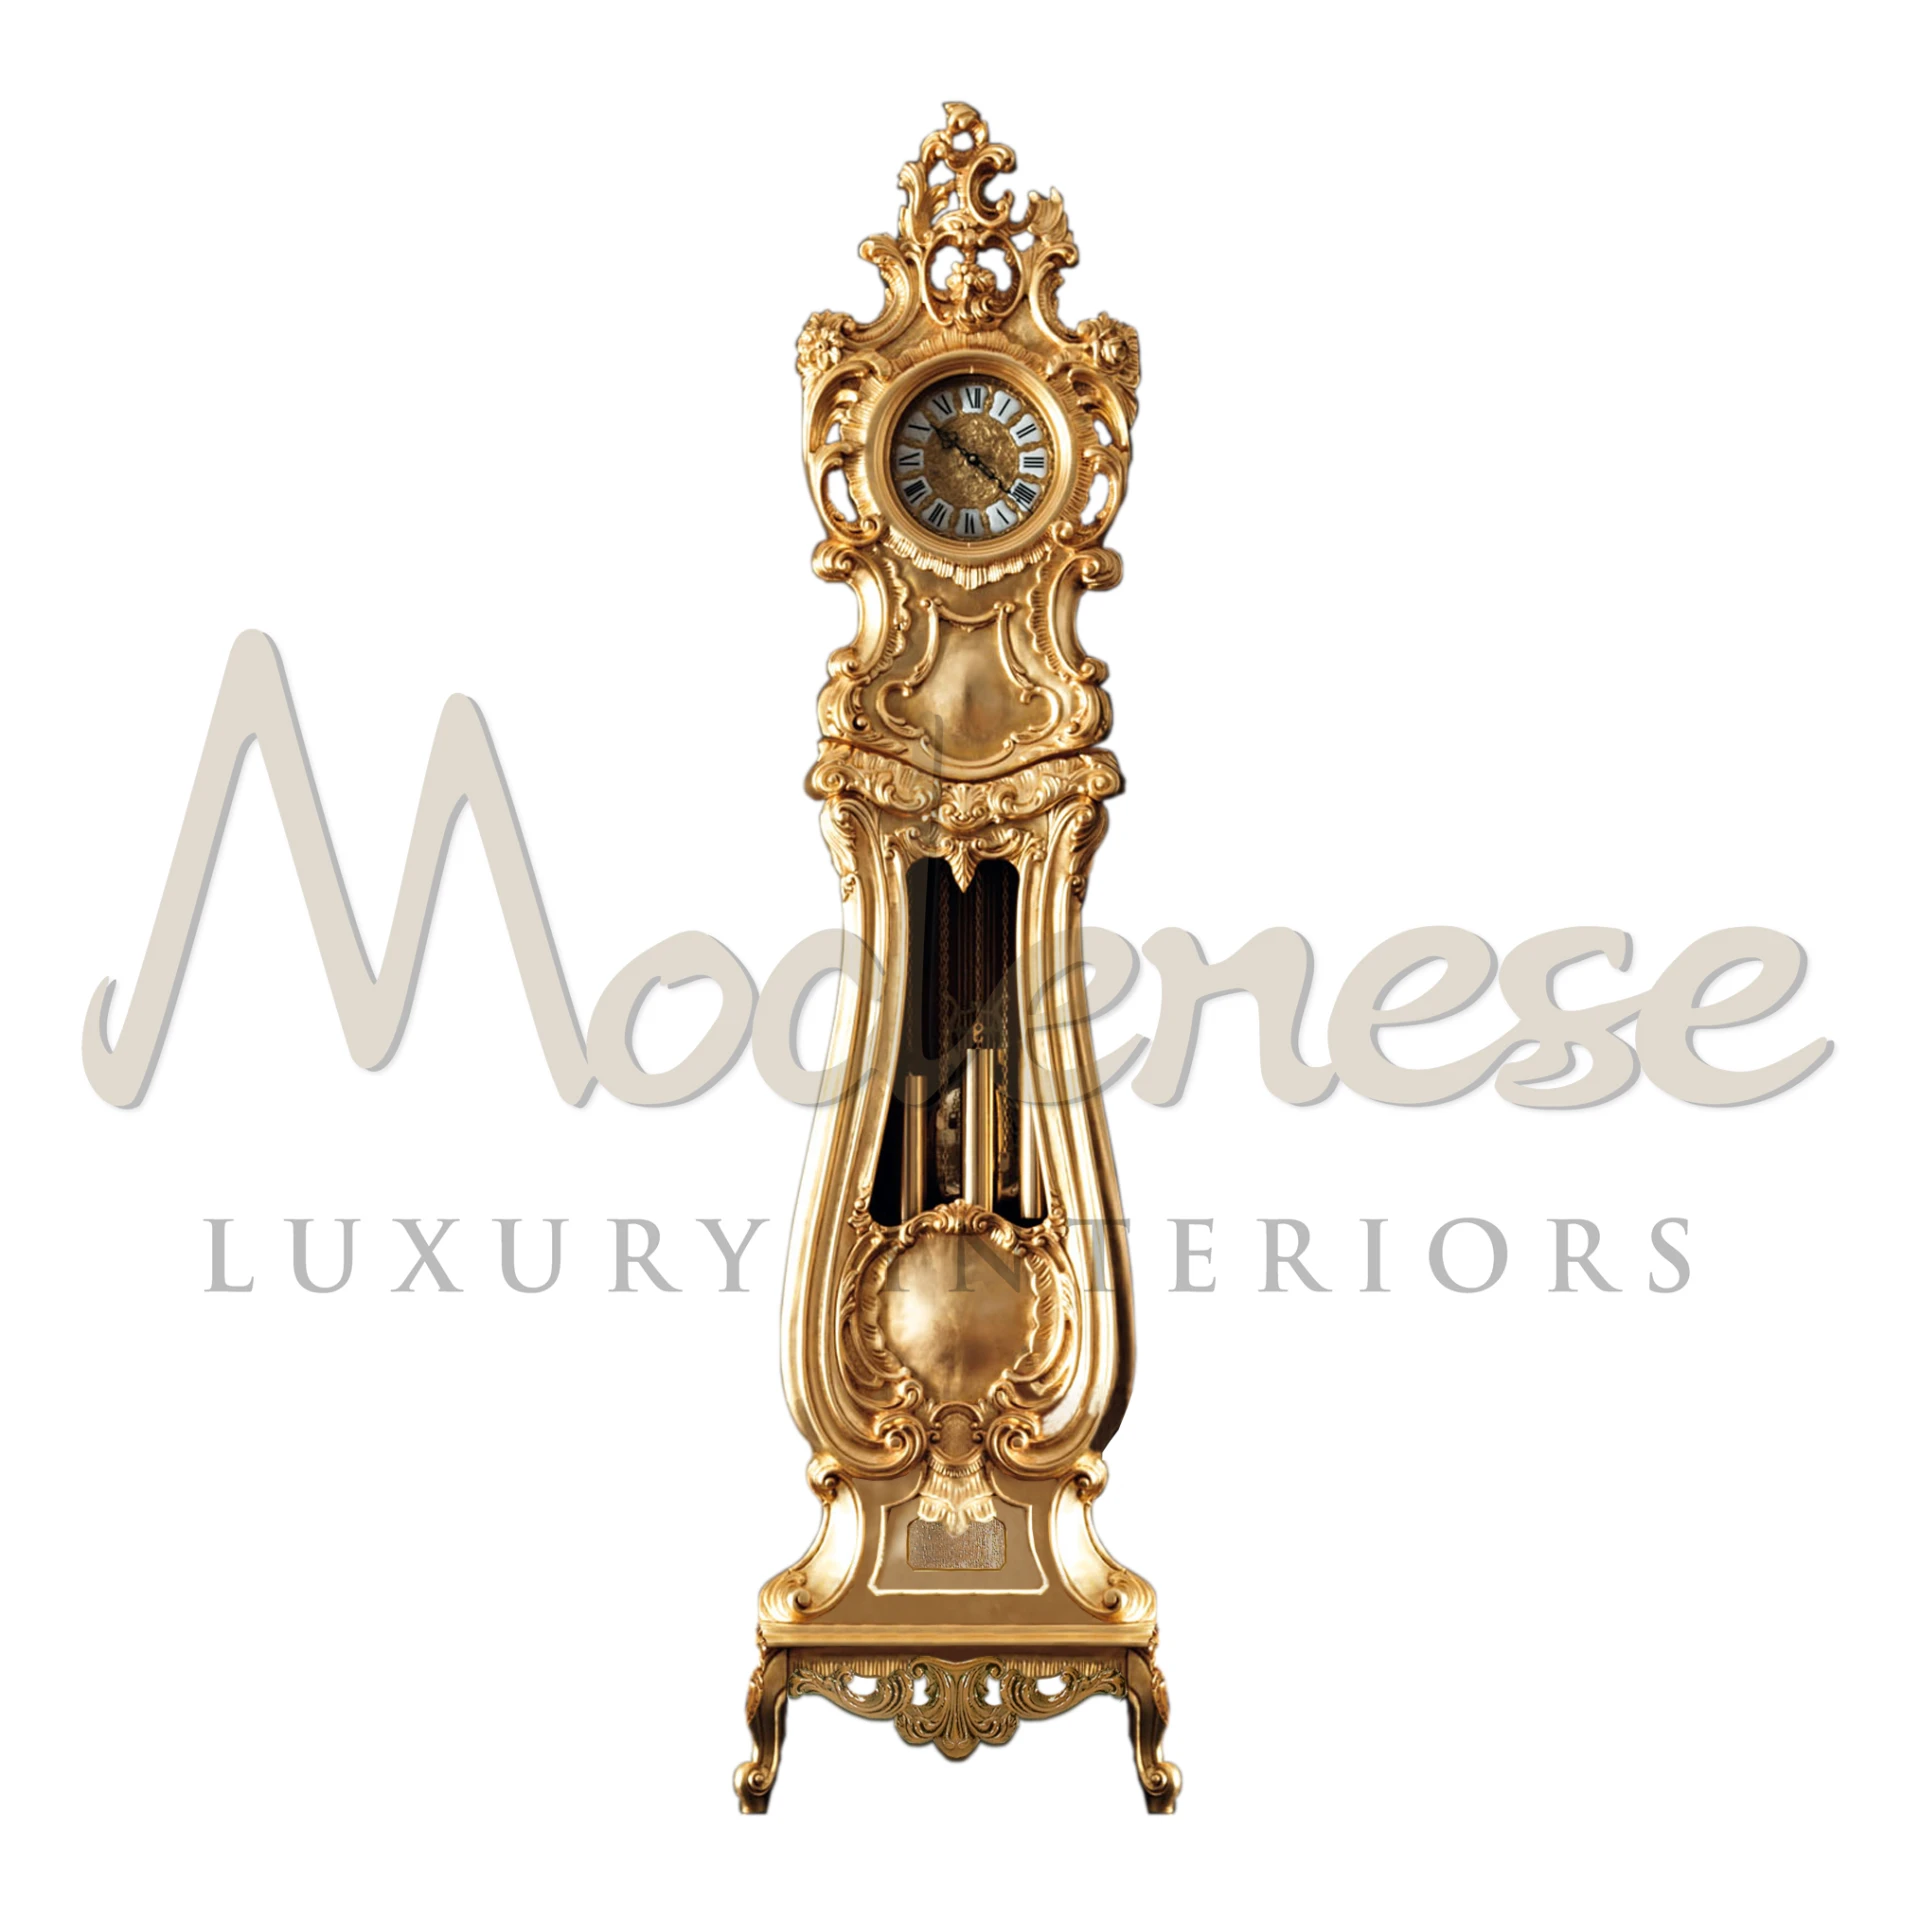 Gold Grandfather Clock with iconic design by Modenese Furniture
